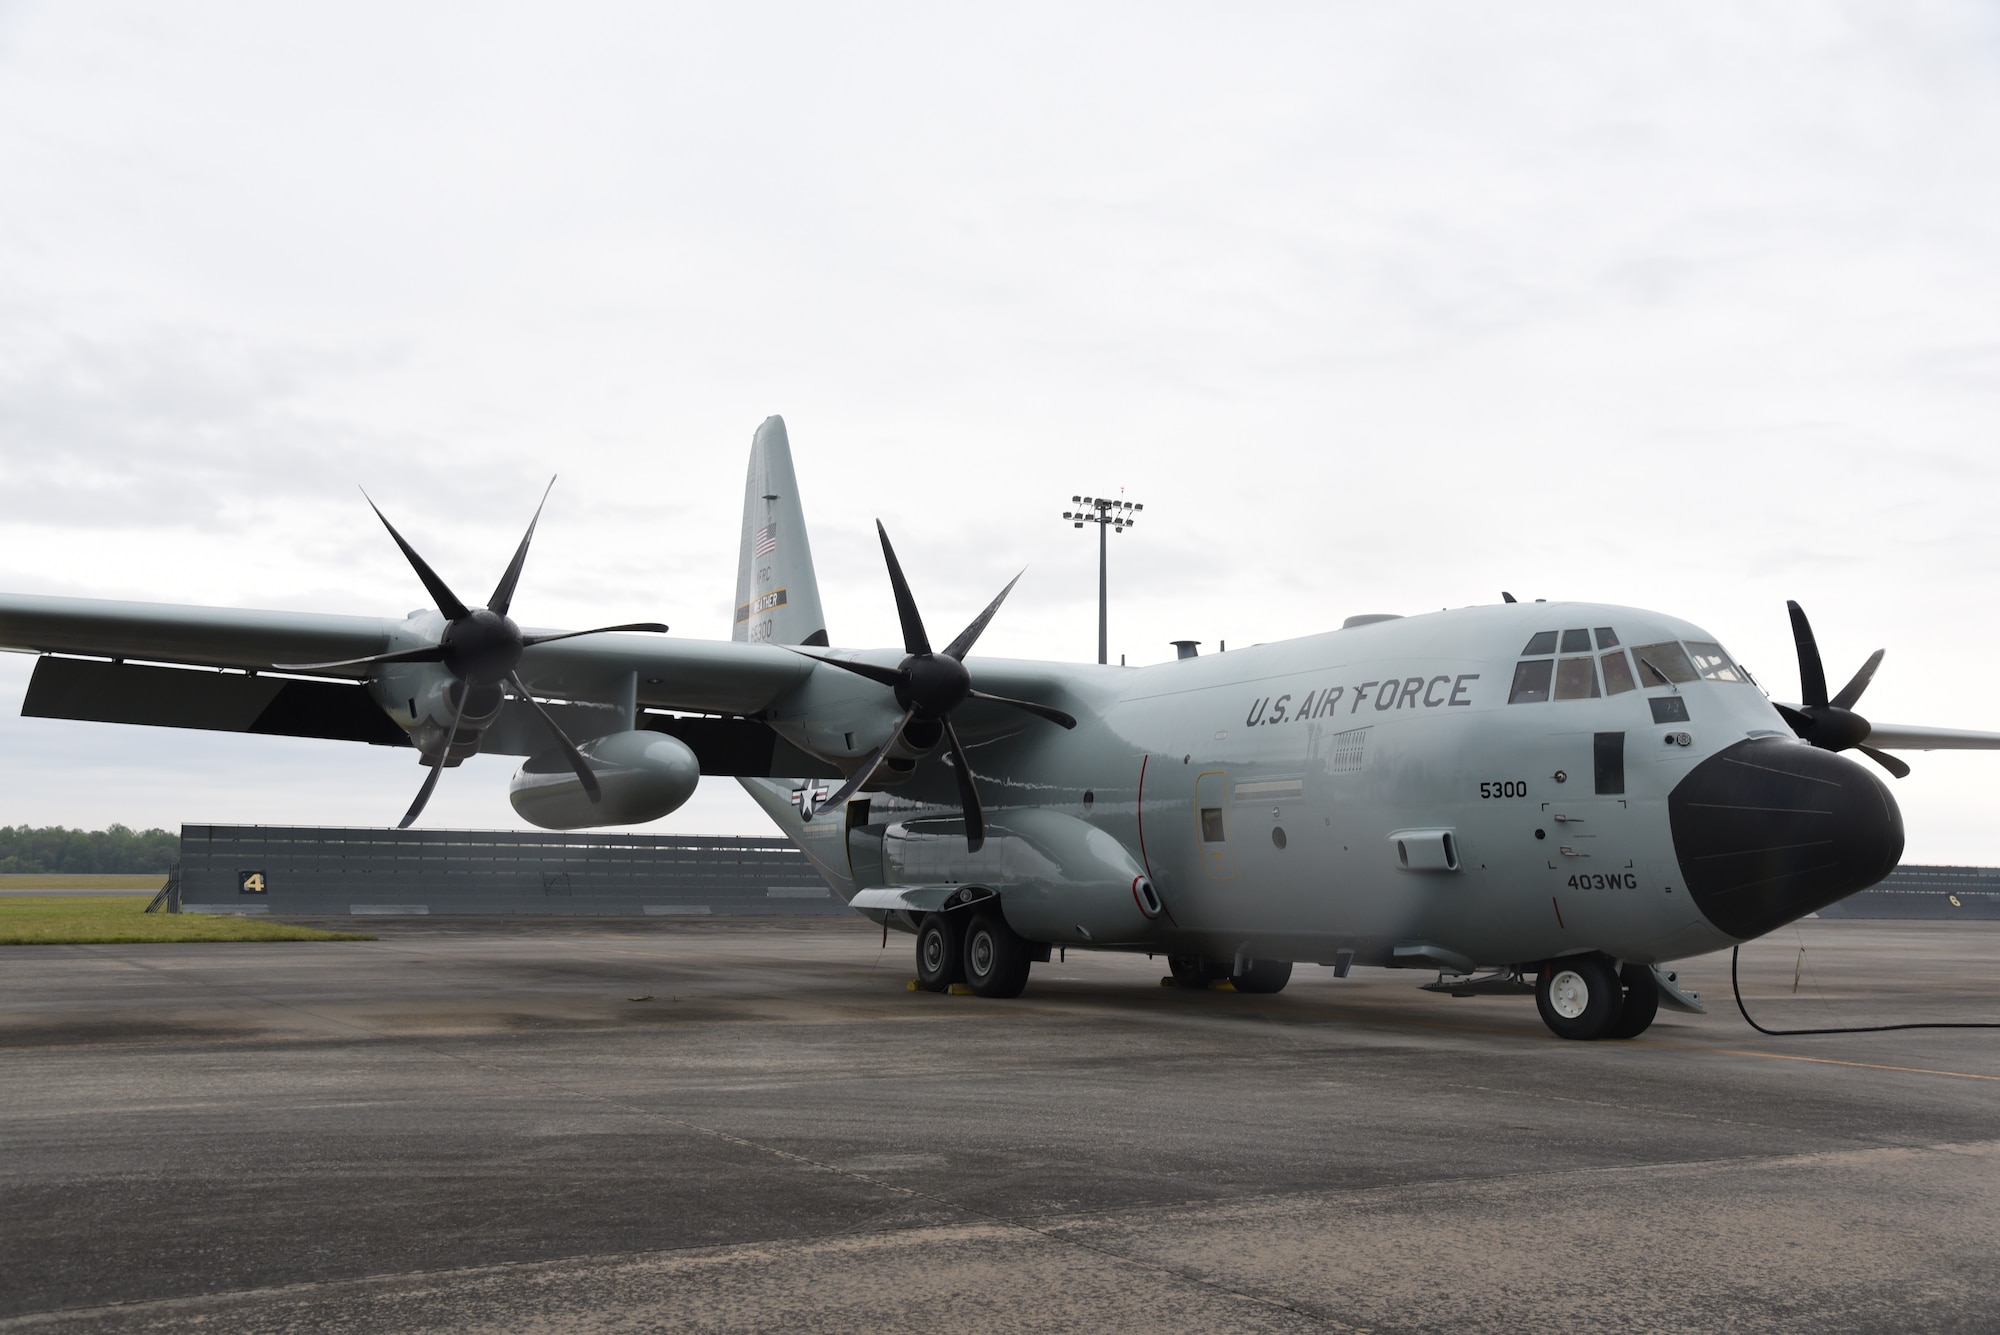 WC-130J Super Hercules with new shiny gray paint scheme and vintage markings.